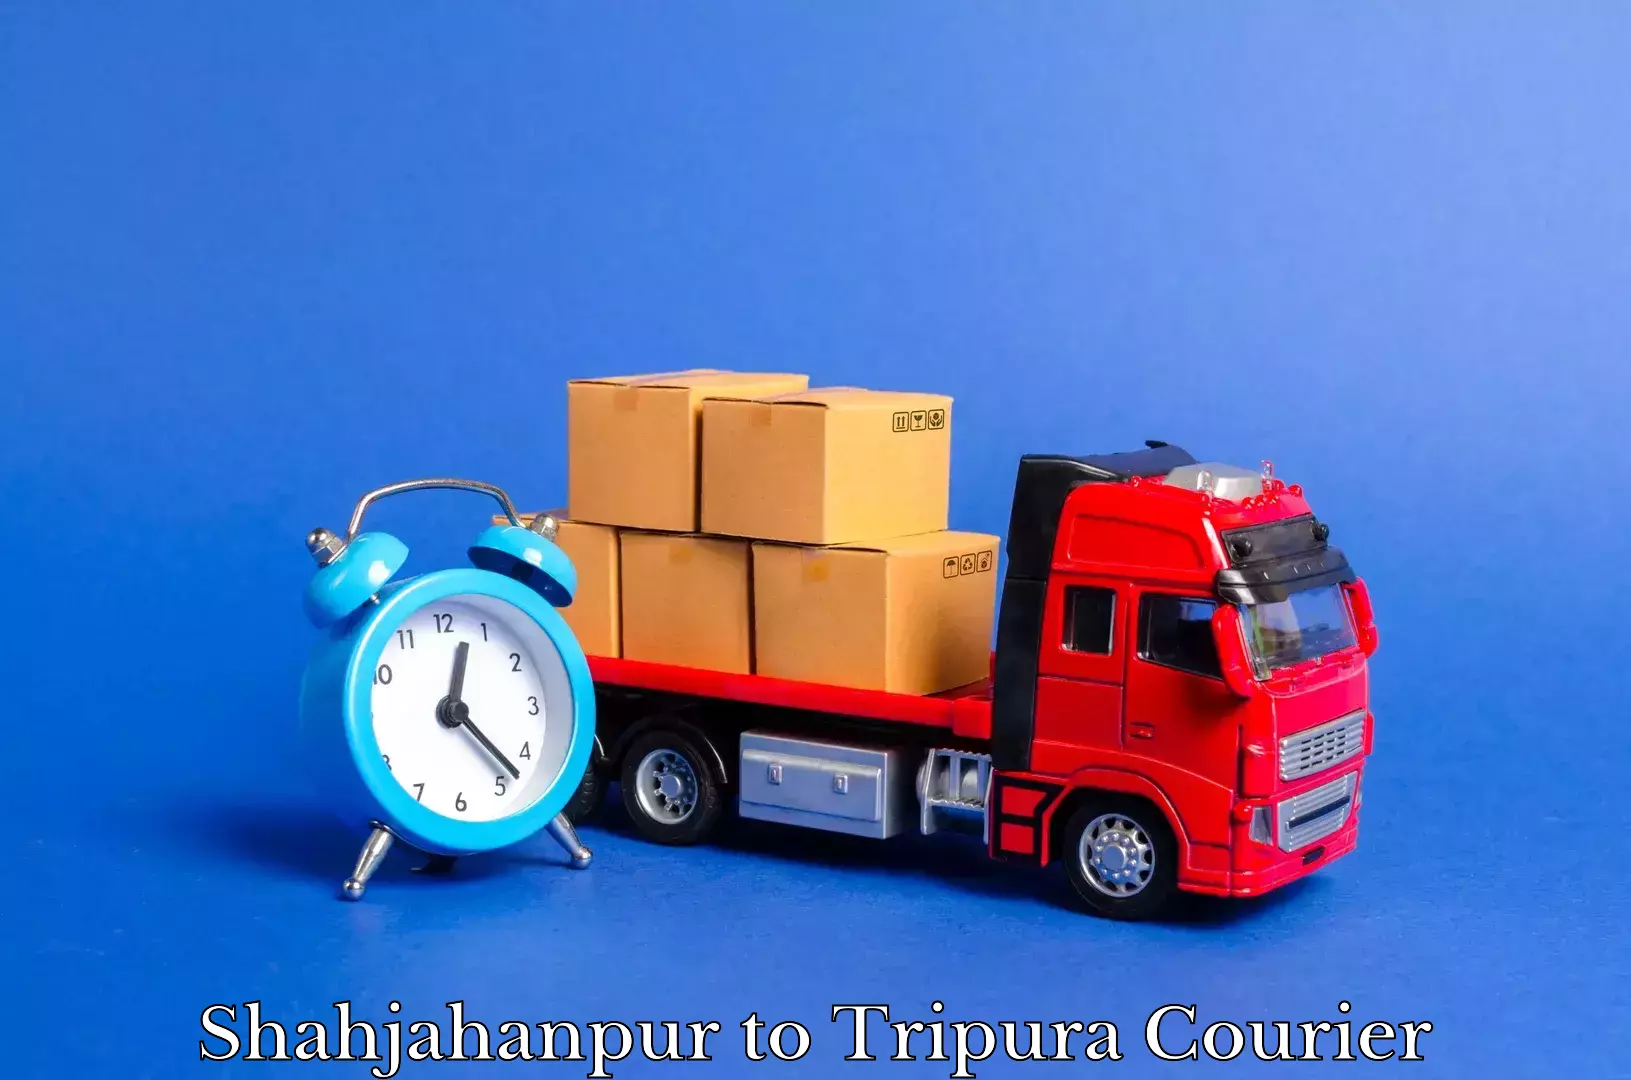 Furniture transport specialists Shahjahanpur to North Tripura